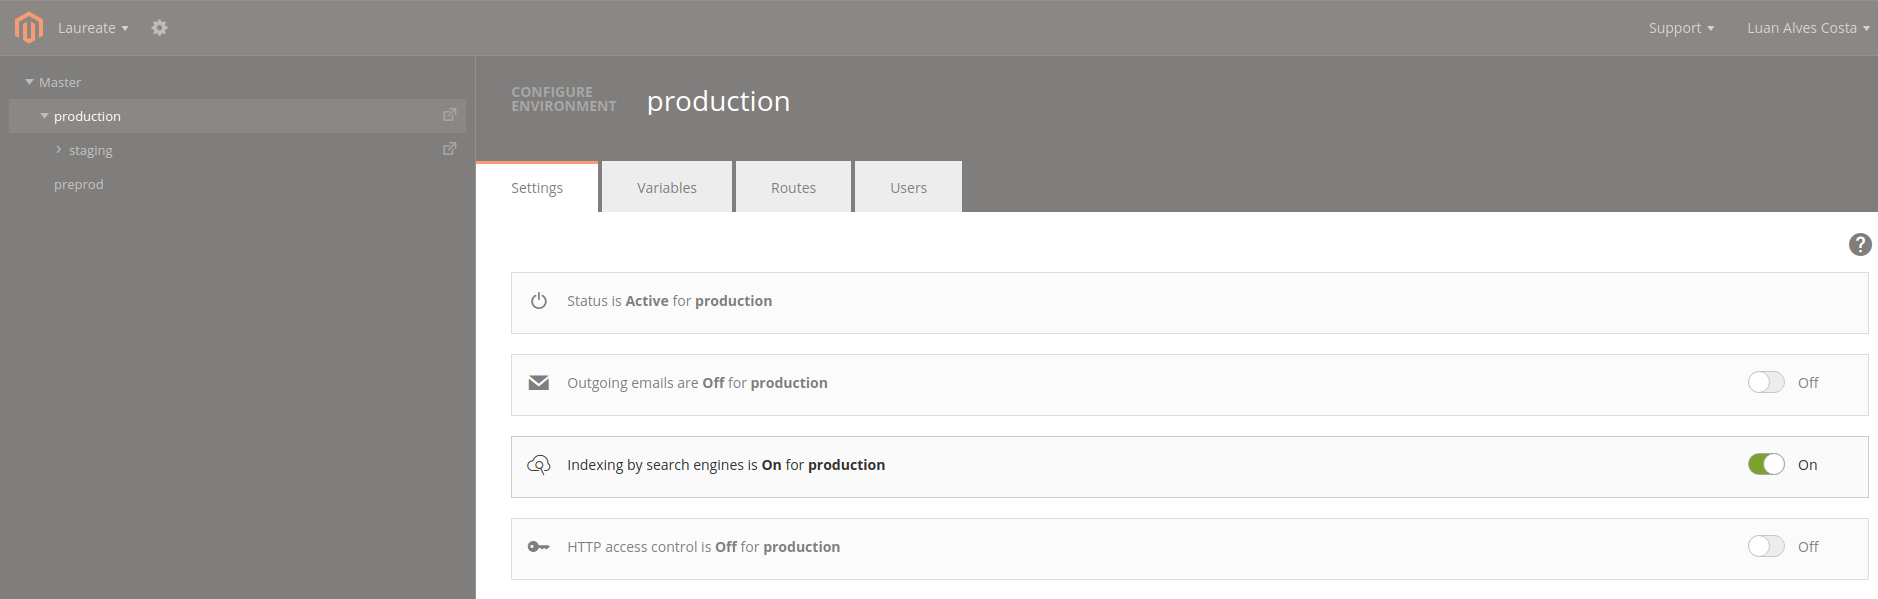 Use the Project Web Interface to manage environments